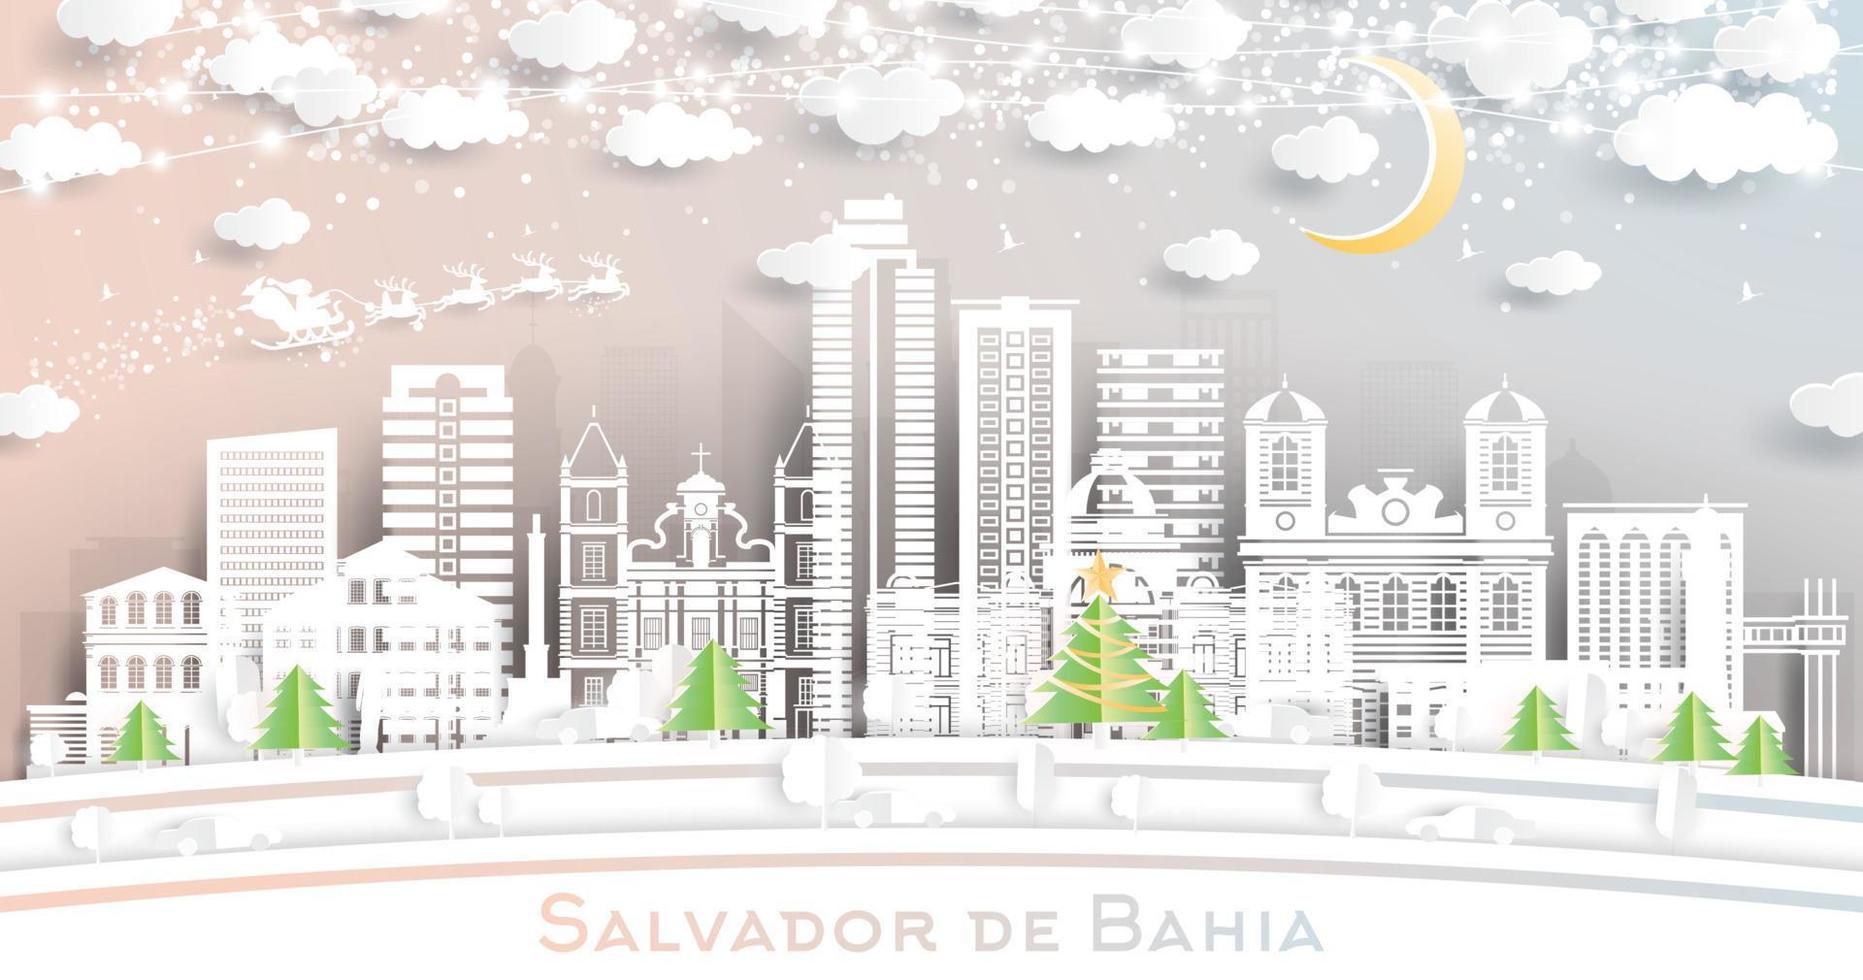 Salvador de Bahia Brazil City Skyline in Paper Cut Style with Snowflakes, Moon and Neon Garland. vector